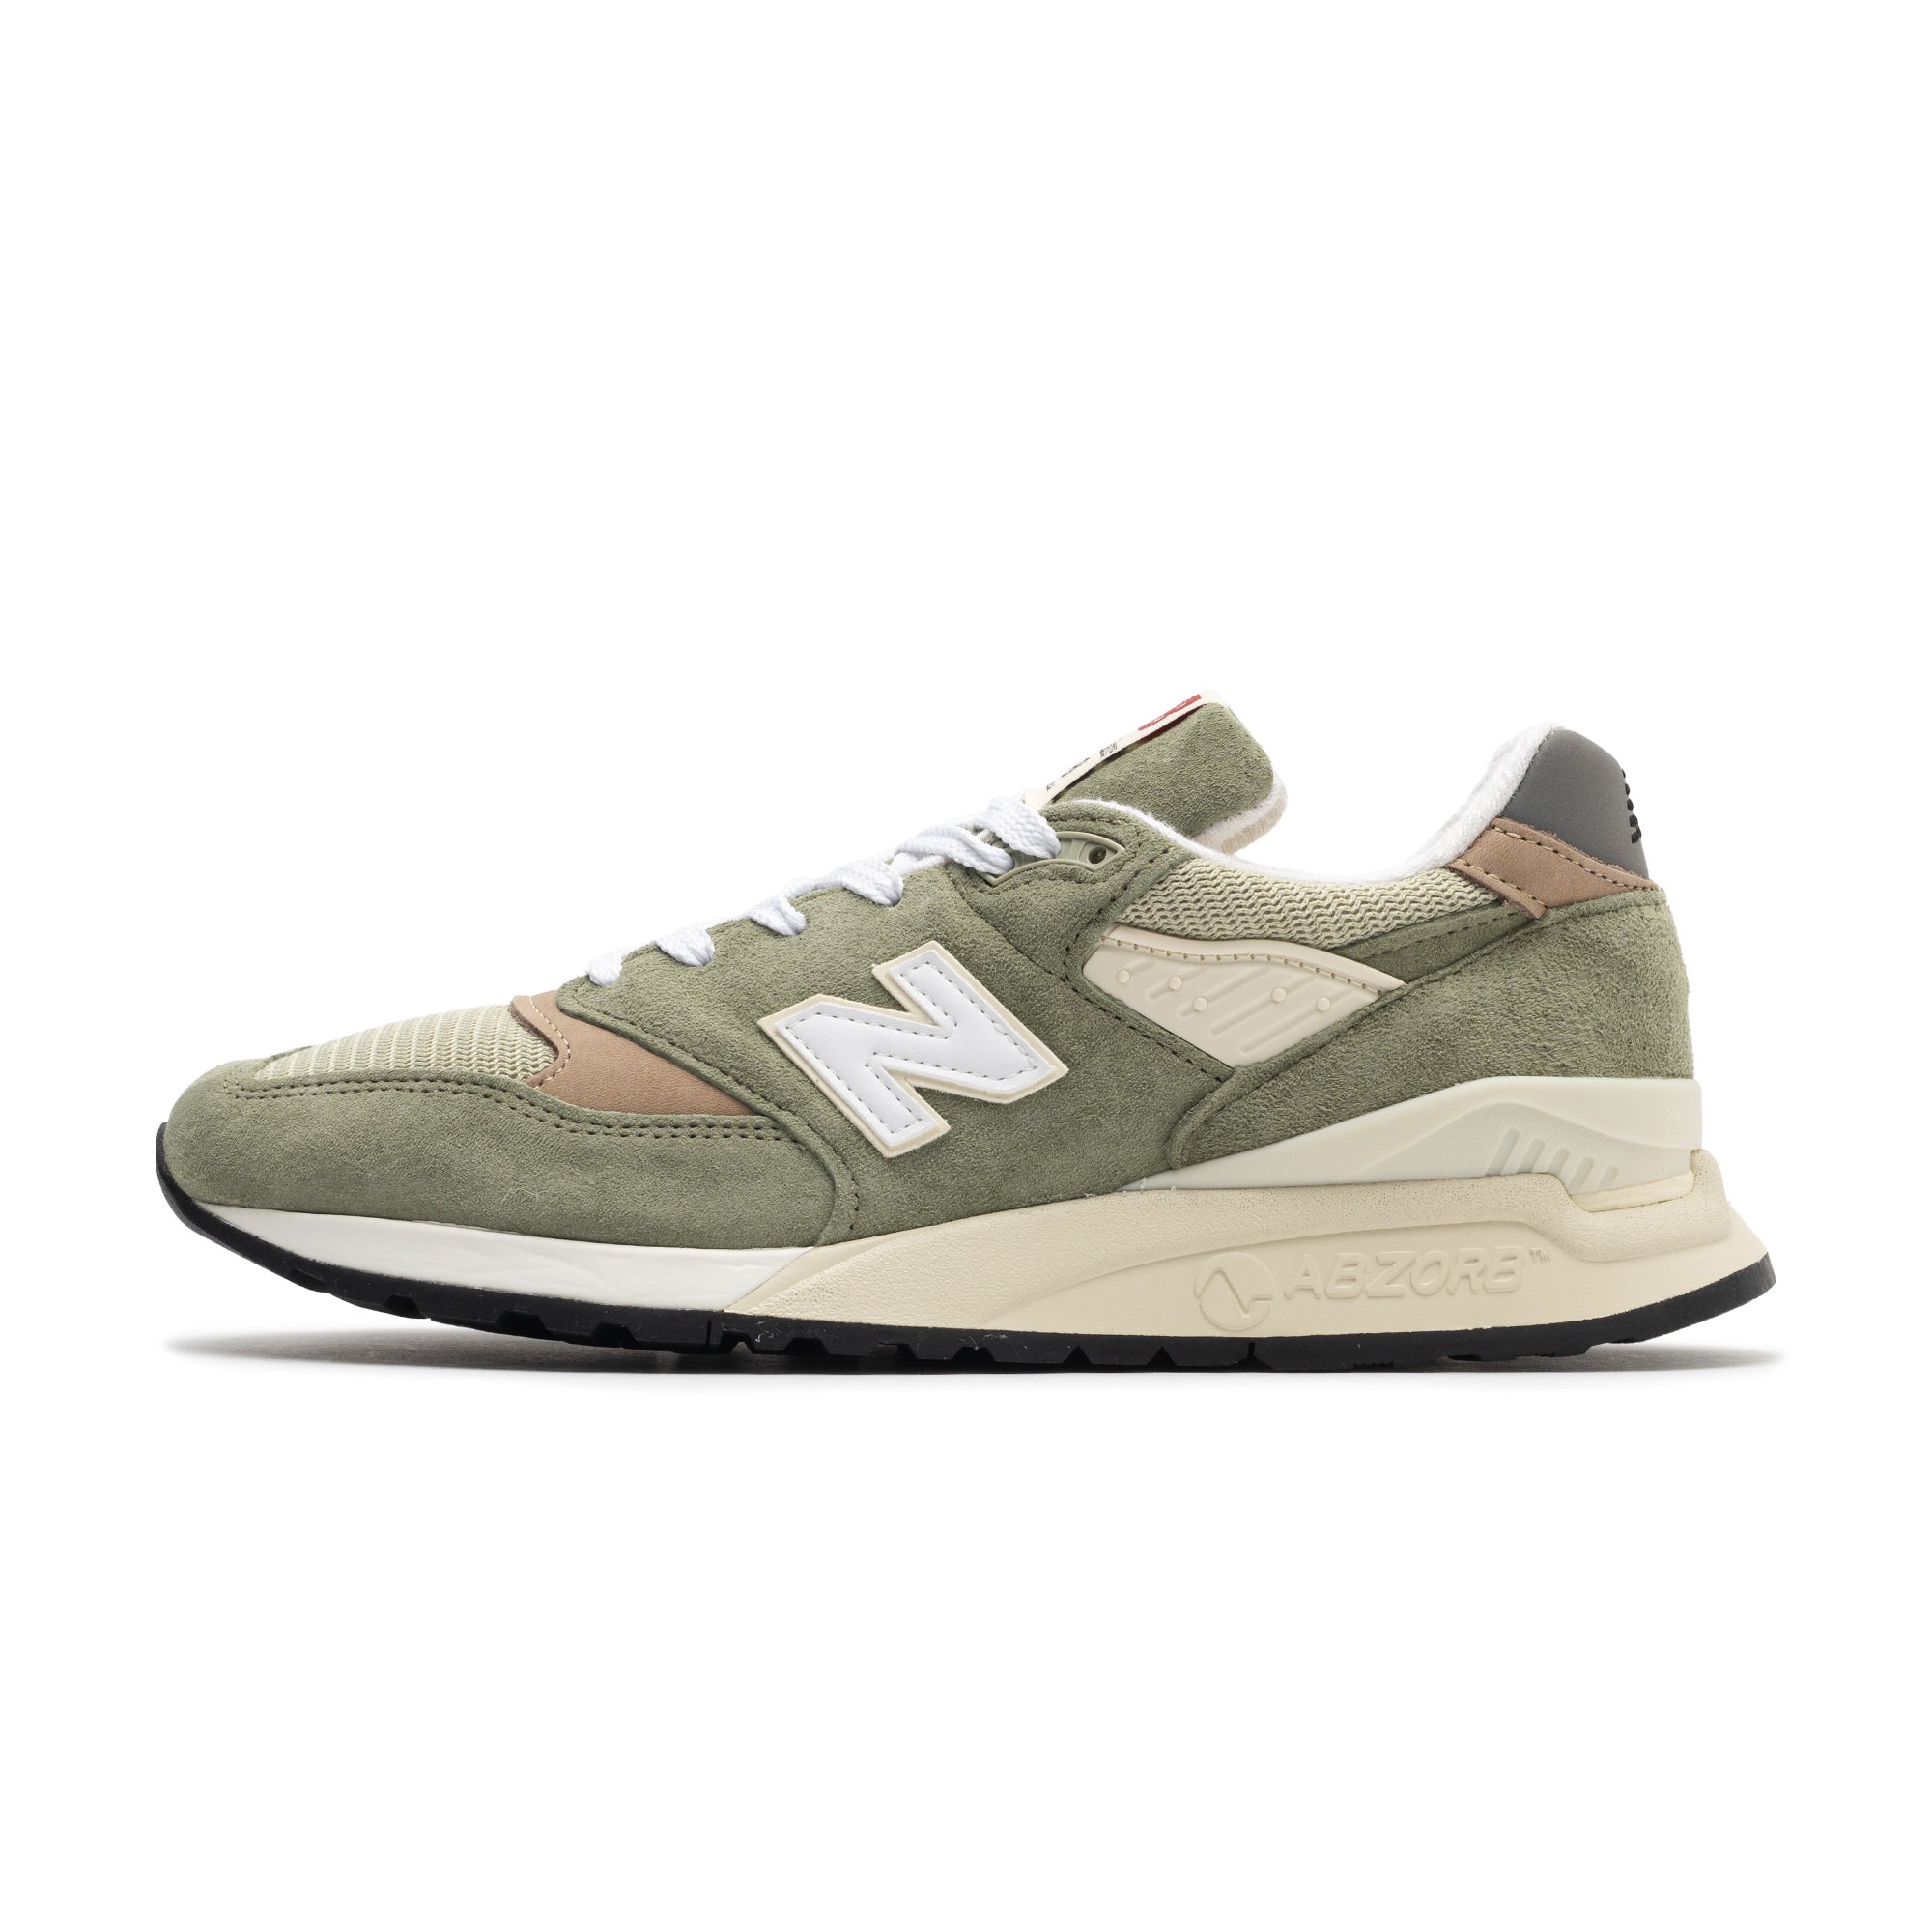 New Balance and Paperboy Paris Team Up for Collaborative Collection